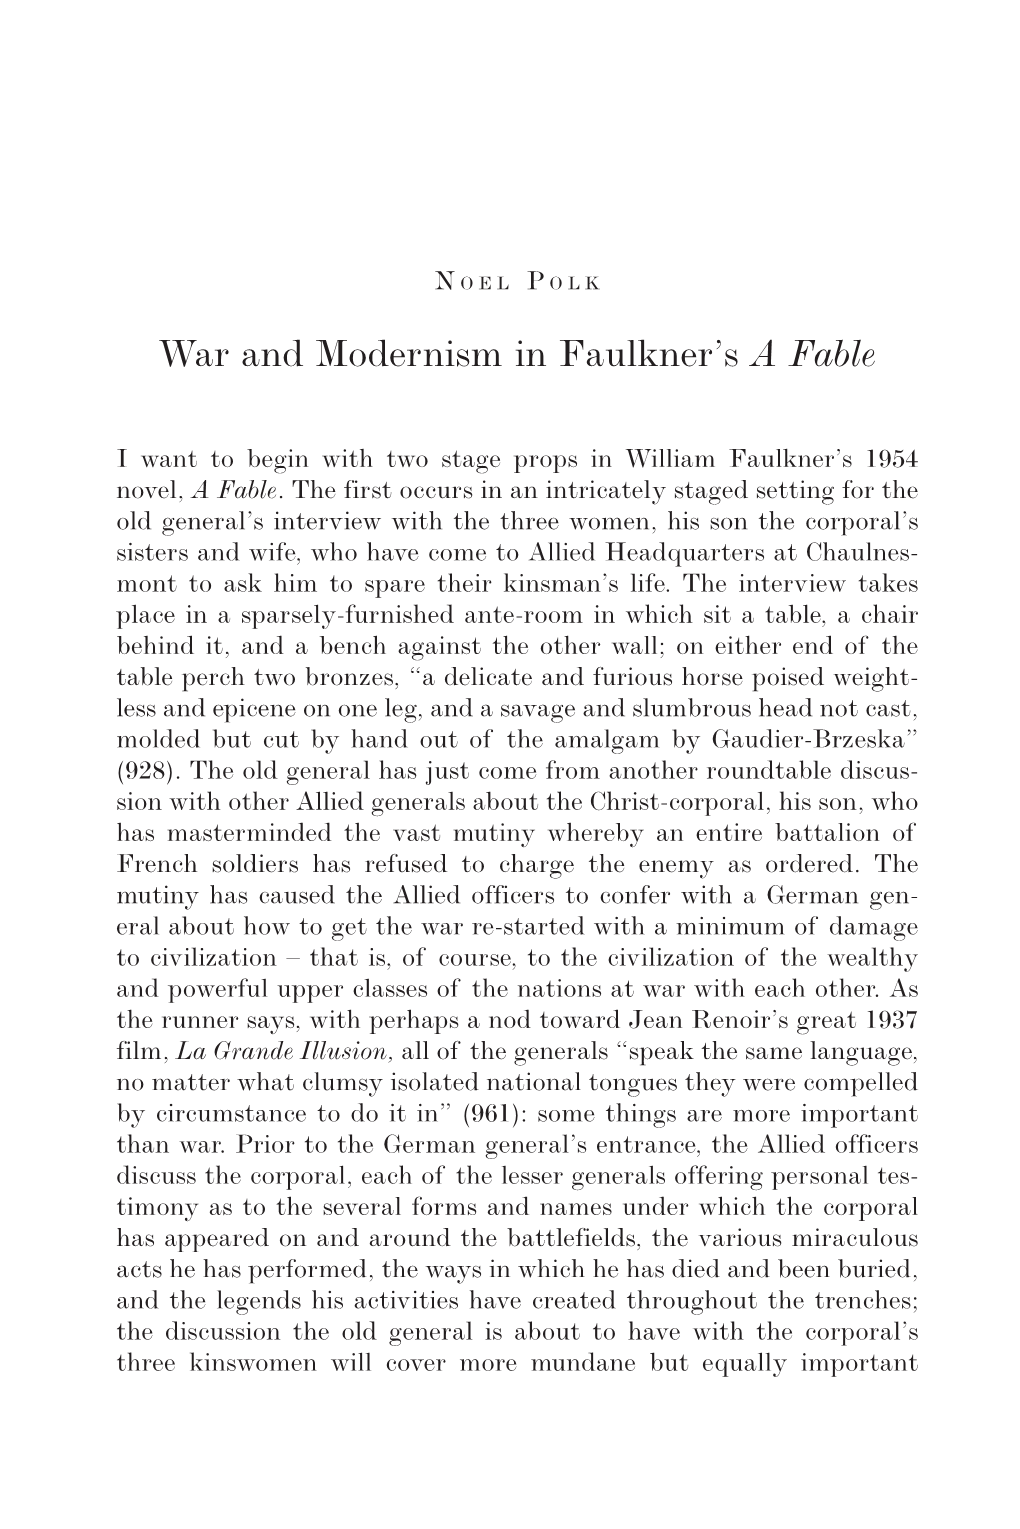 War and Modernism in Faulkner's a Fable